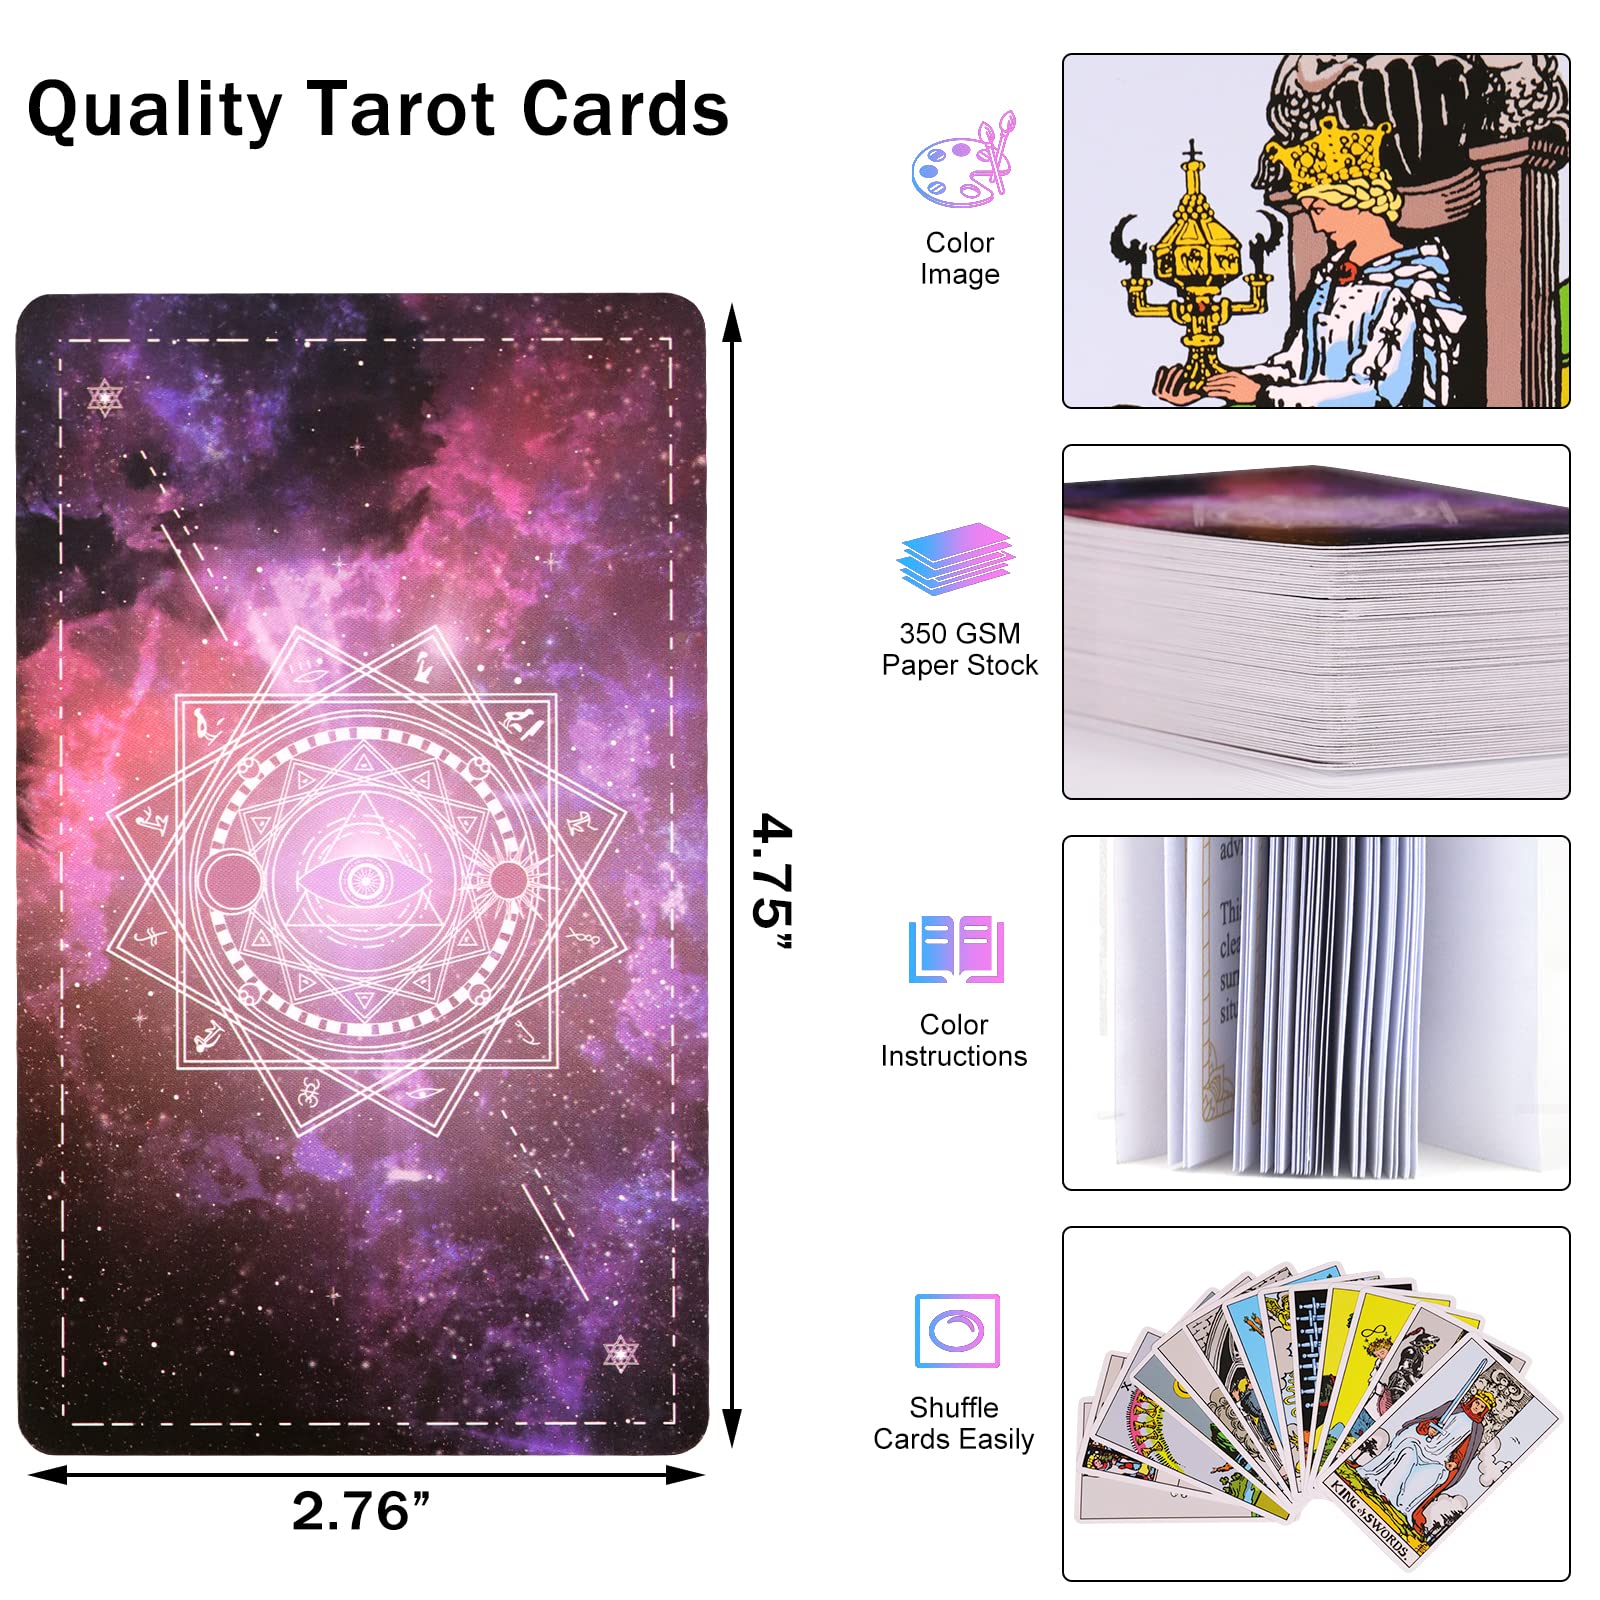 TIRLANO Tarot Cards with Guide Book, Romance